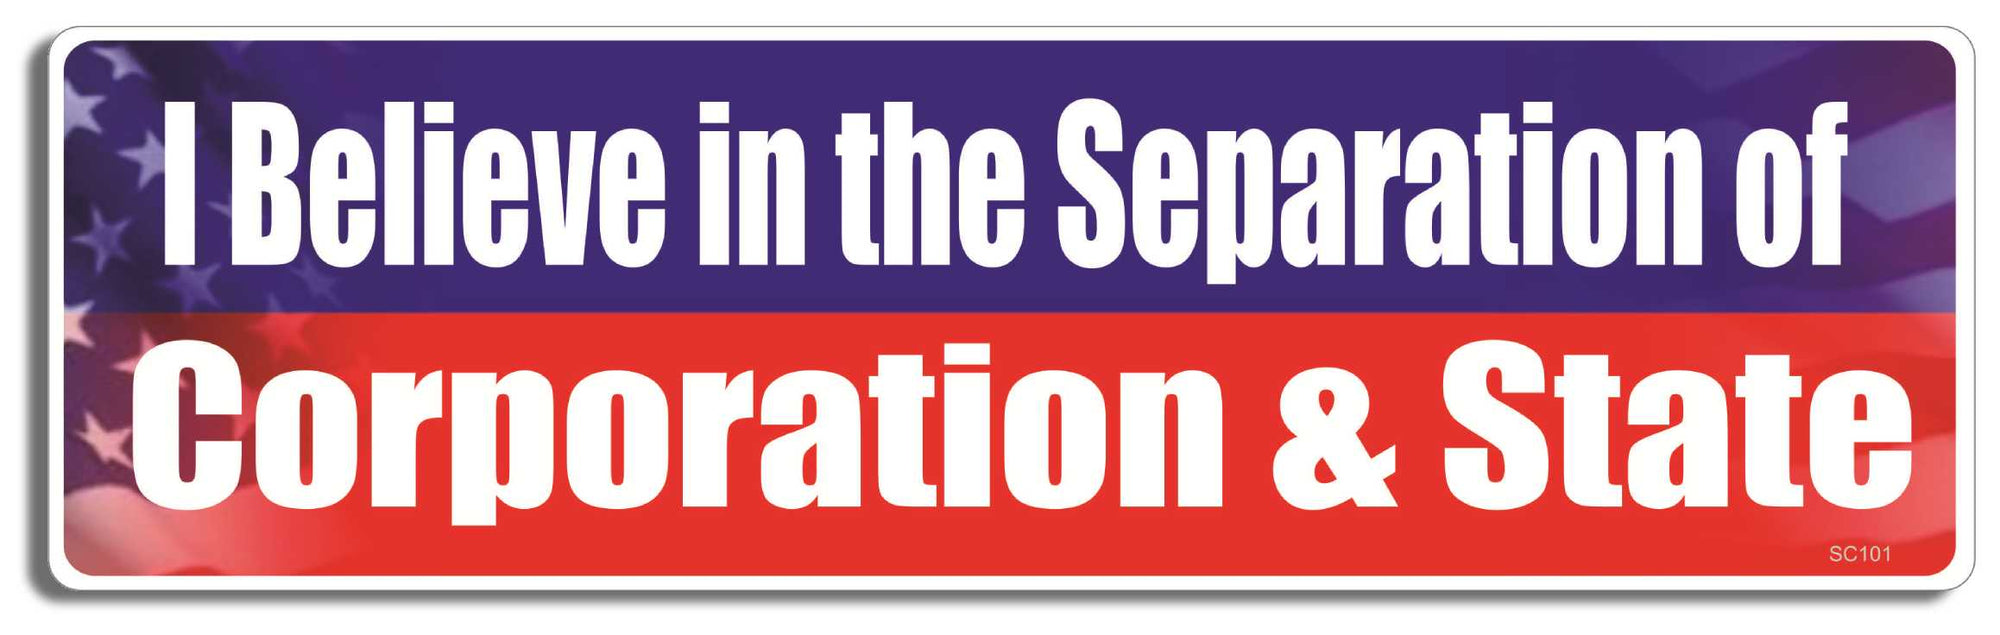 I believe in the separation of corporation & state - 3" x 10" Bumper Sticker--Car Magnet- -  Decal Bumper Sticker-liberal Bumper Sticker Car Magnet I believe in the separation of corporation-  Decal for carsAnti Corporation, Anti Government, Politics, Religion